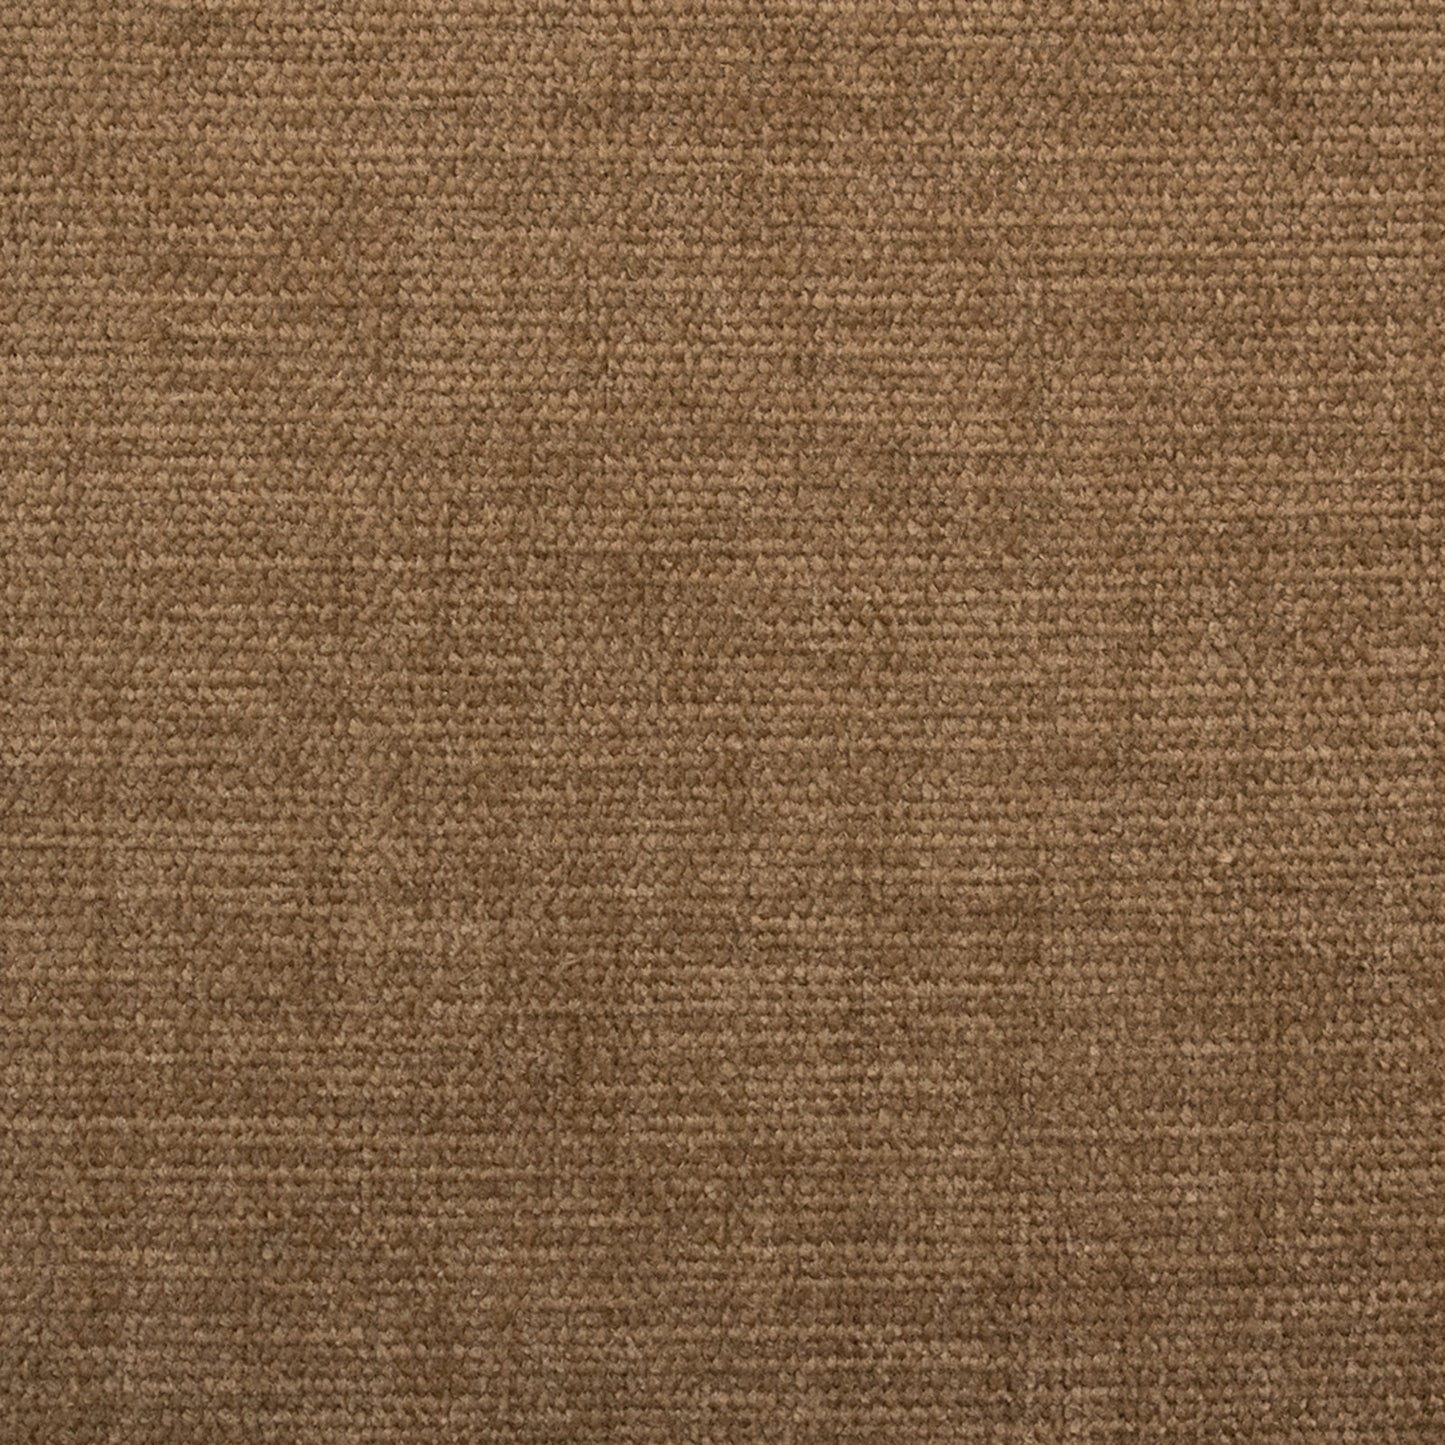 Purchase Greenhouse Fabric S5985 Almond